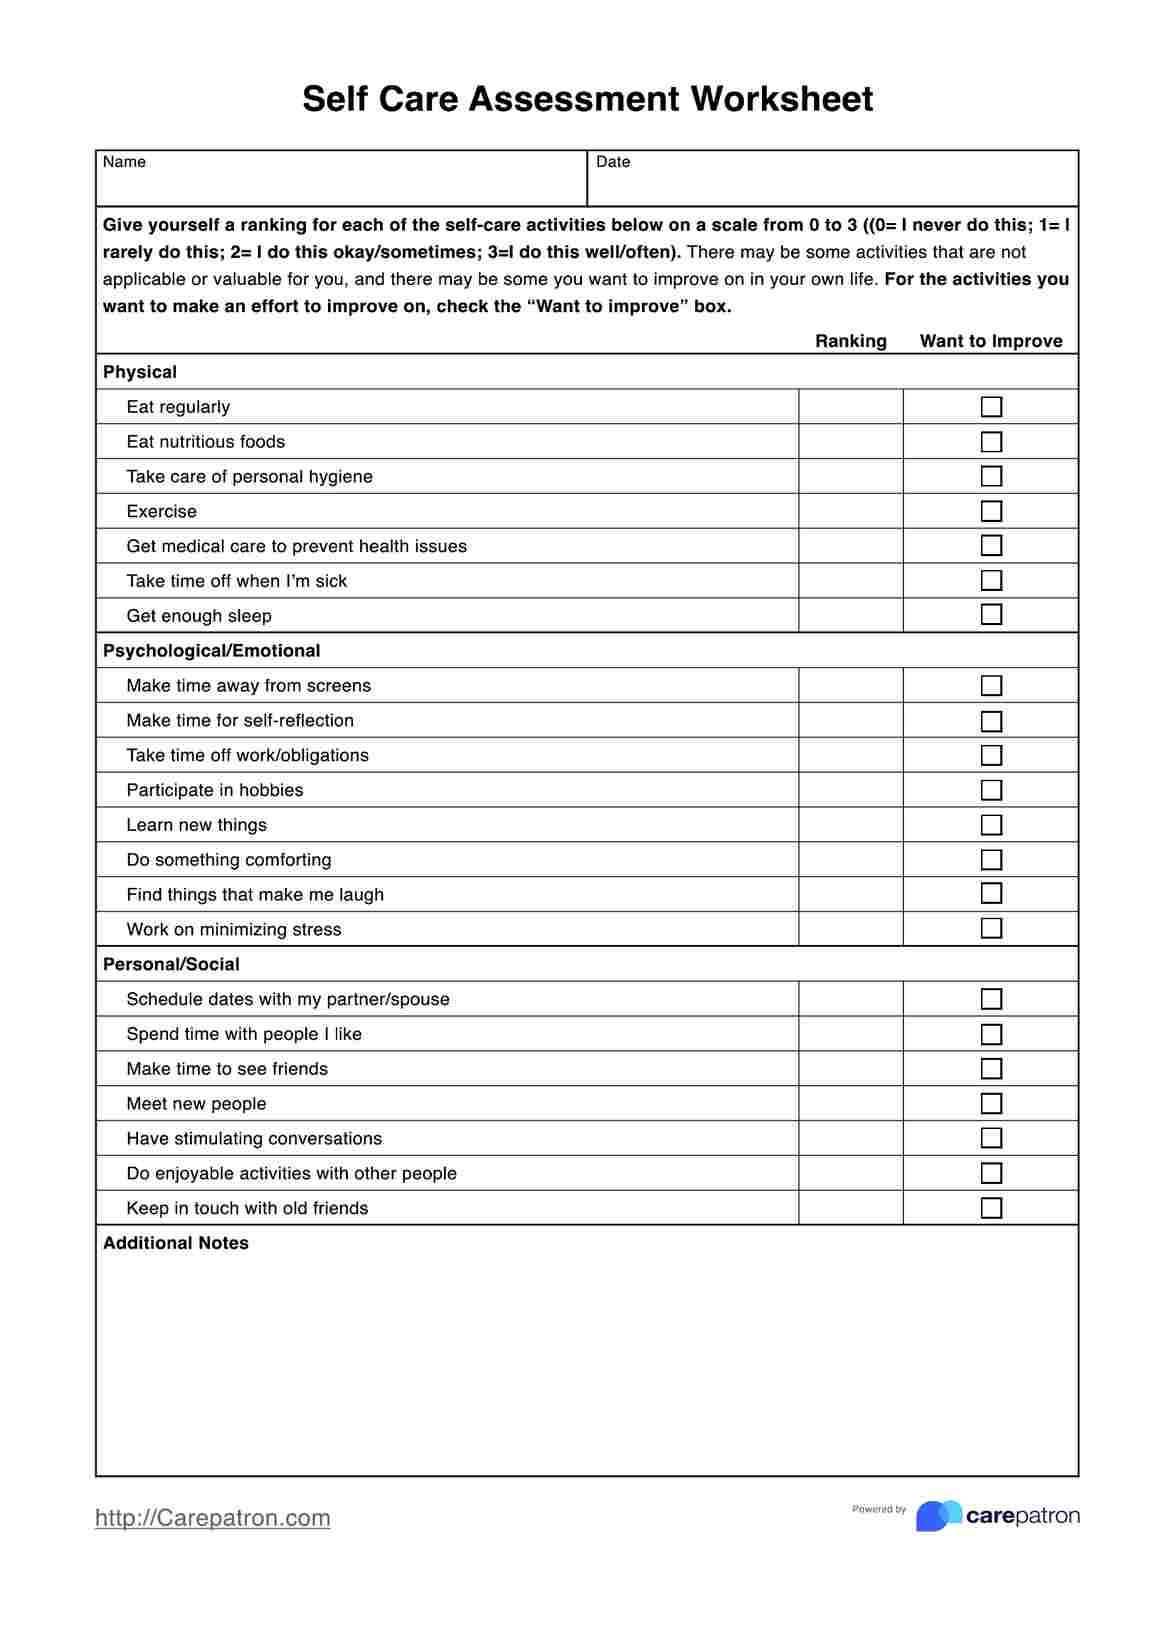 Self Care Assessment Worksheets PDF Example